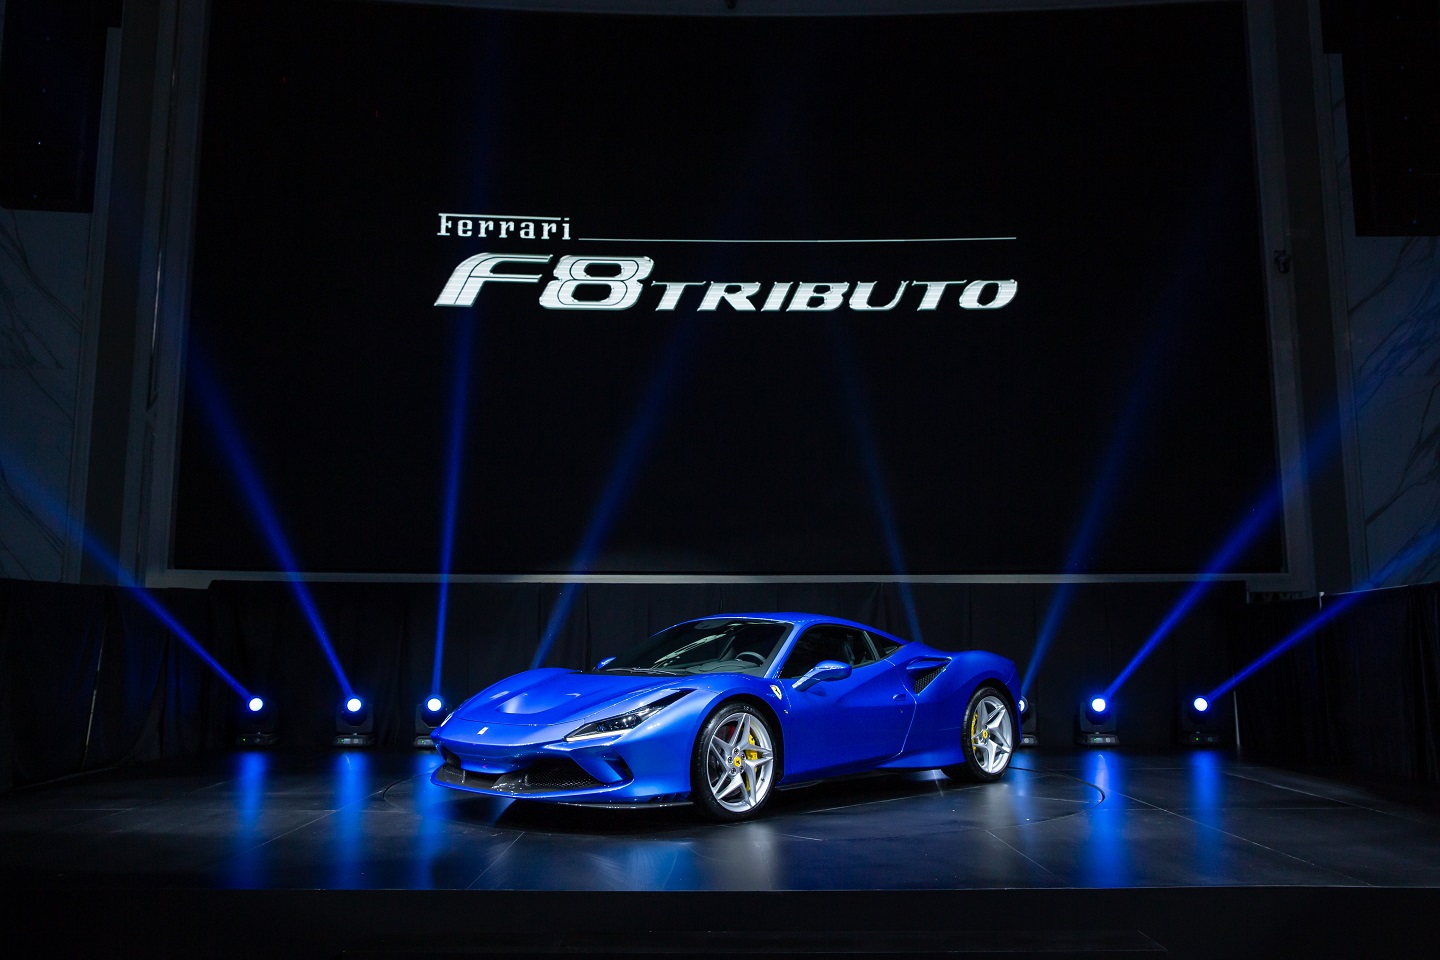 3 Things You Need To Know About The New Ferrari F8 Tributo